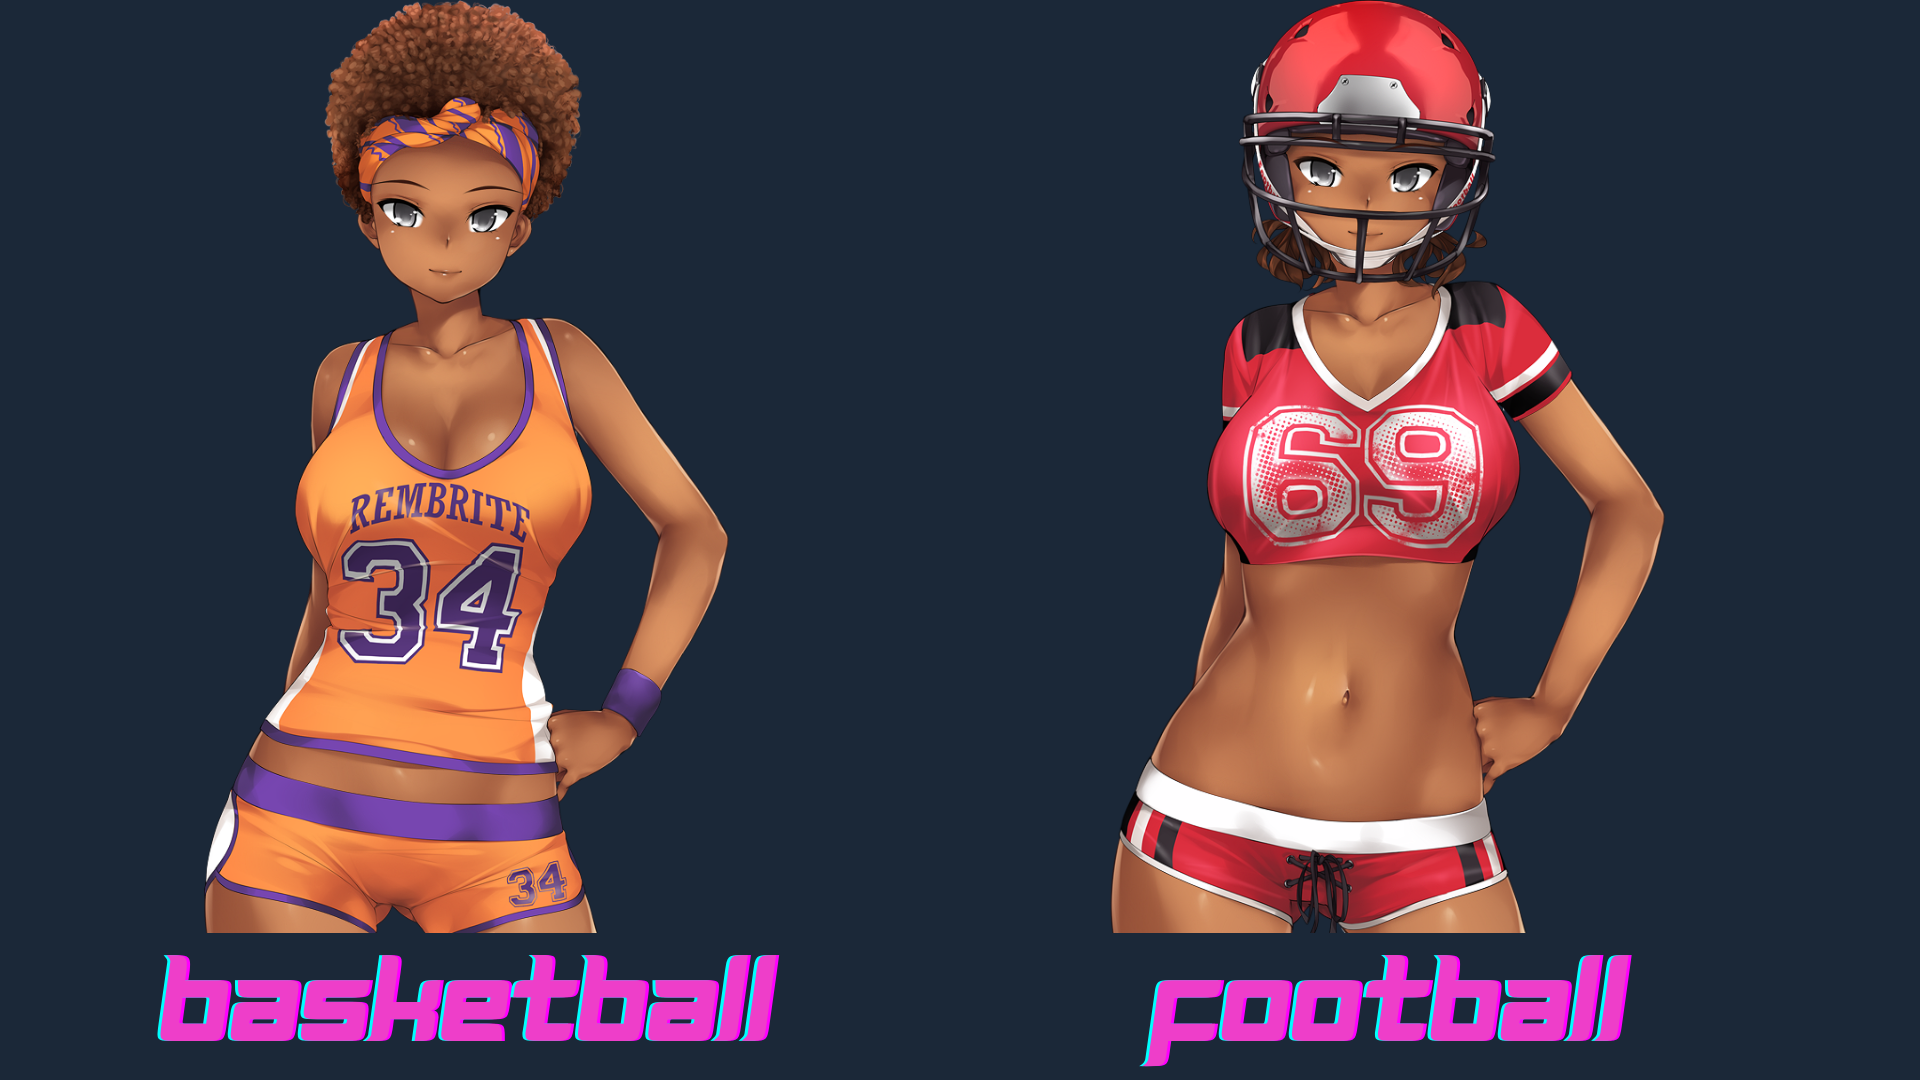 Lola Membrite - Outfits + Hairstyles.